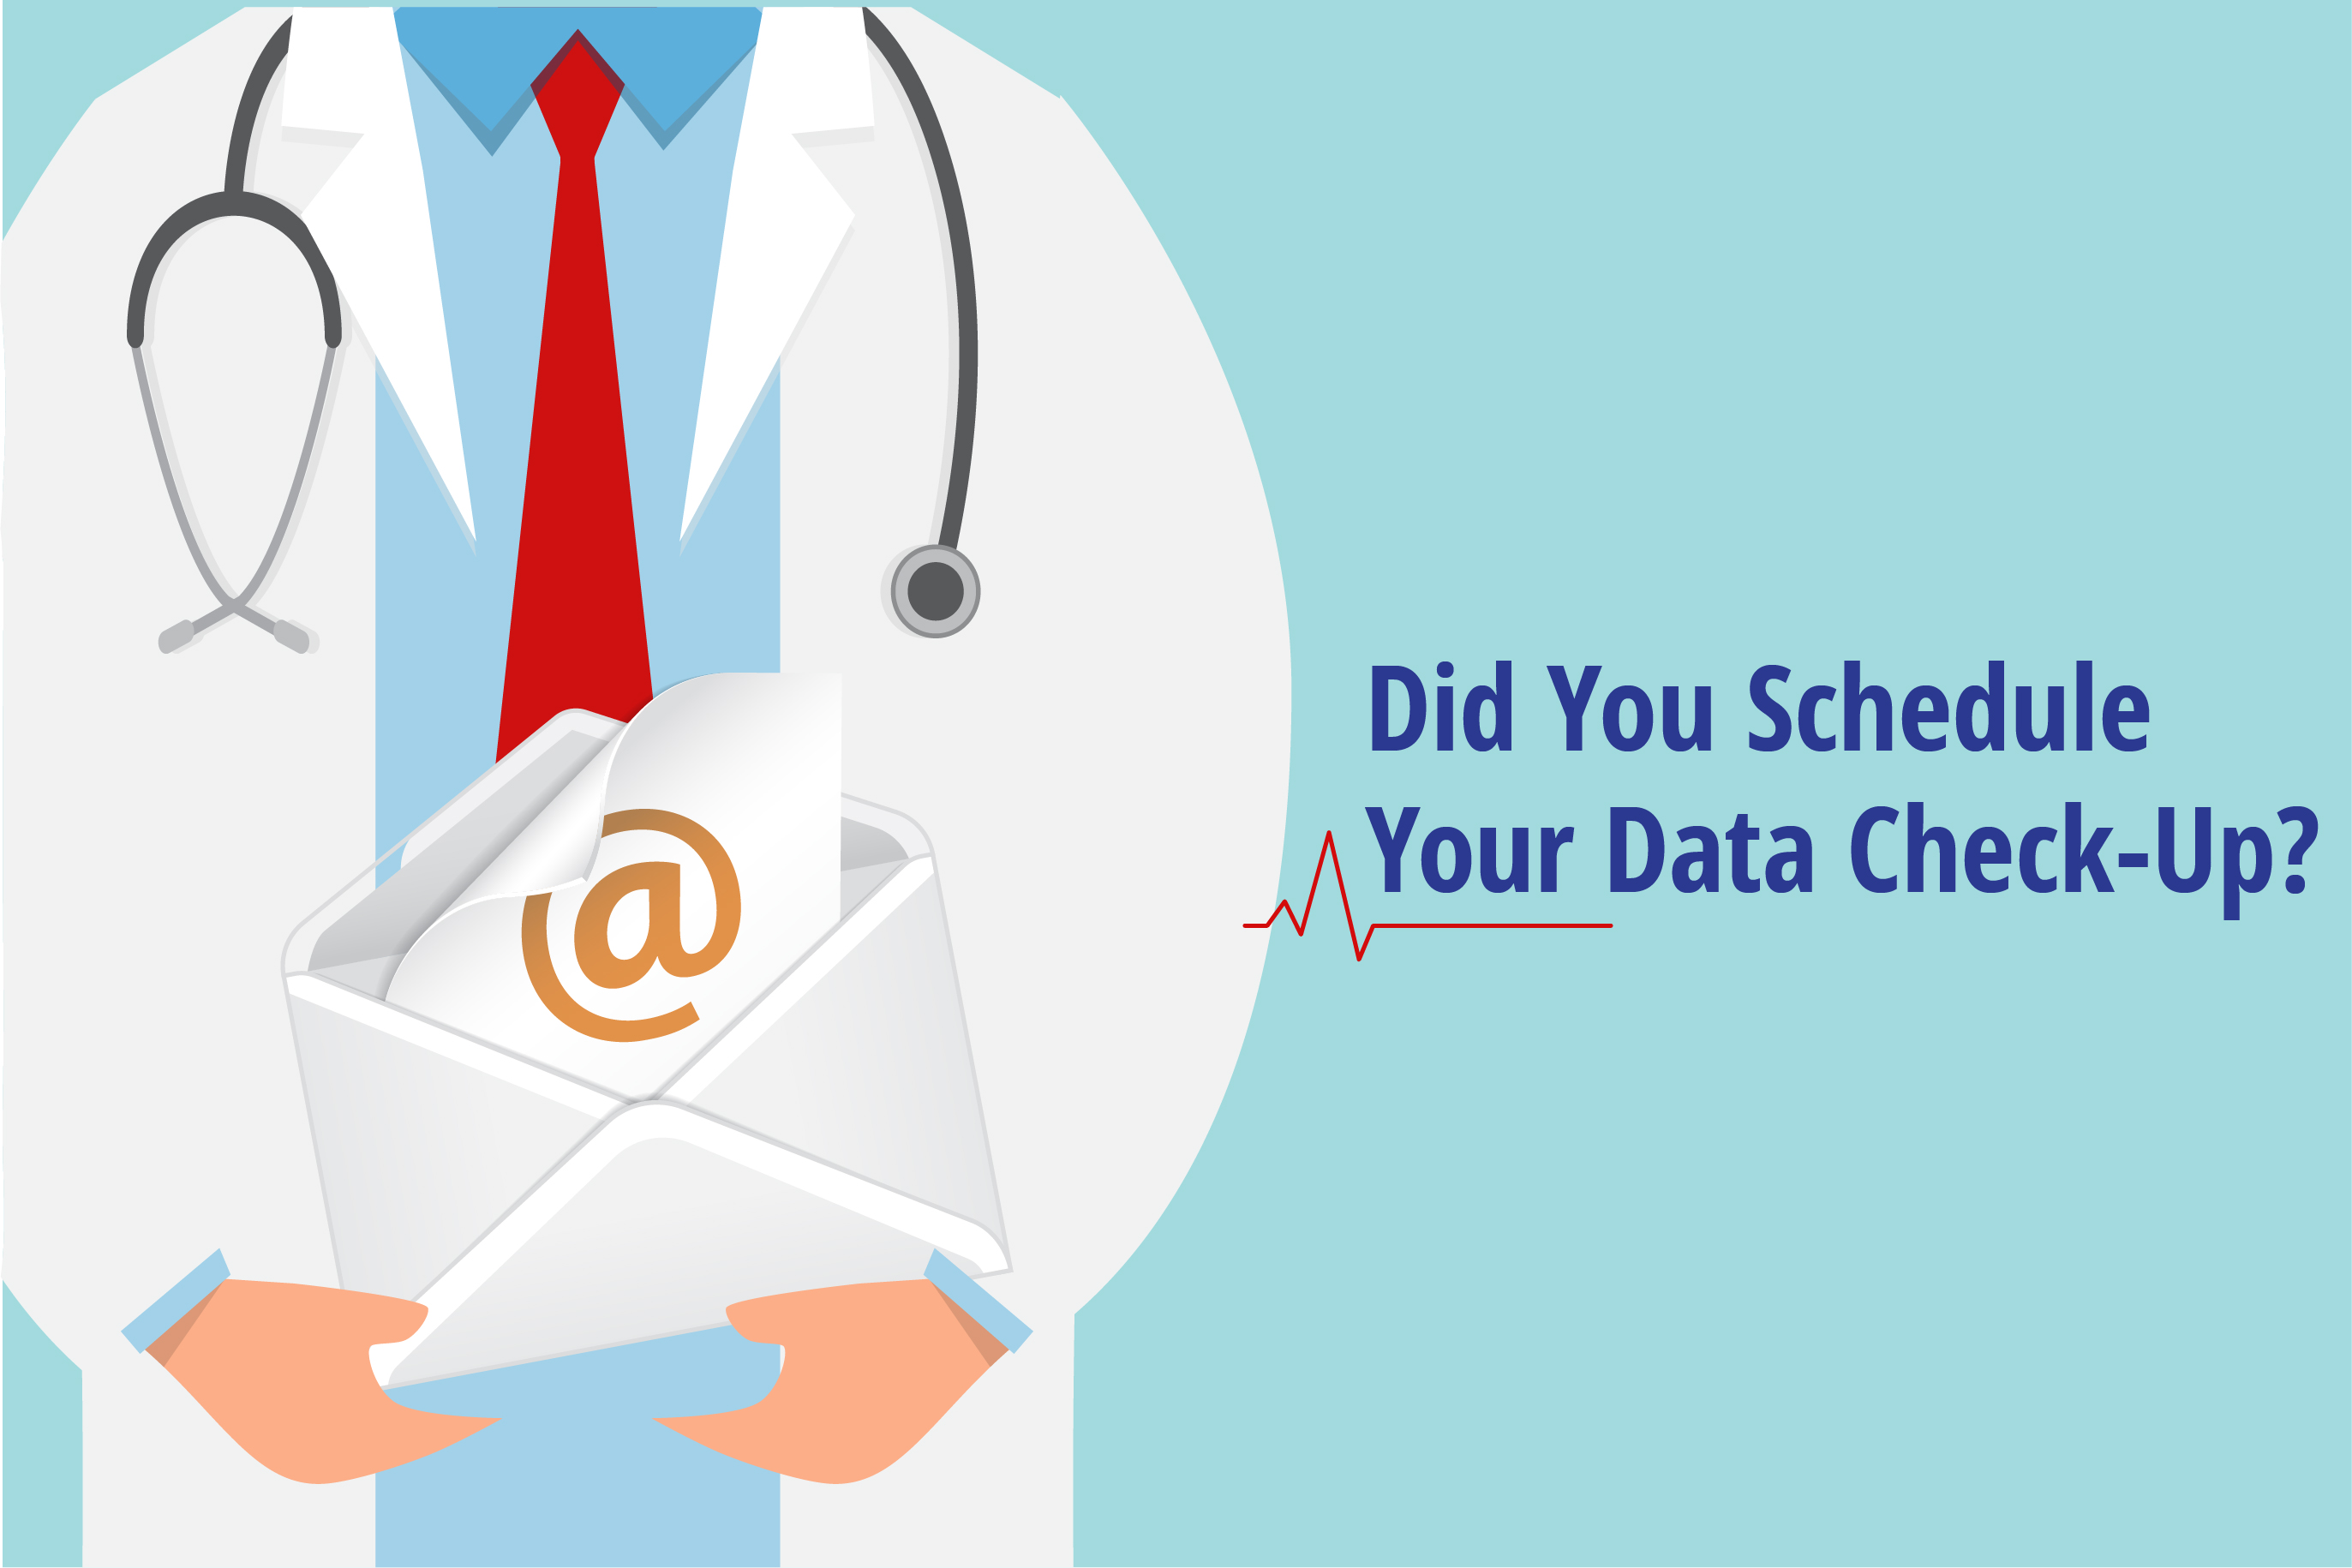 Did You Schedule Your Data Check-Up?